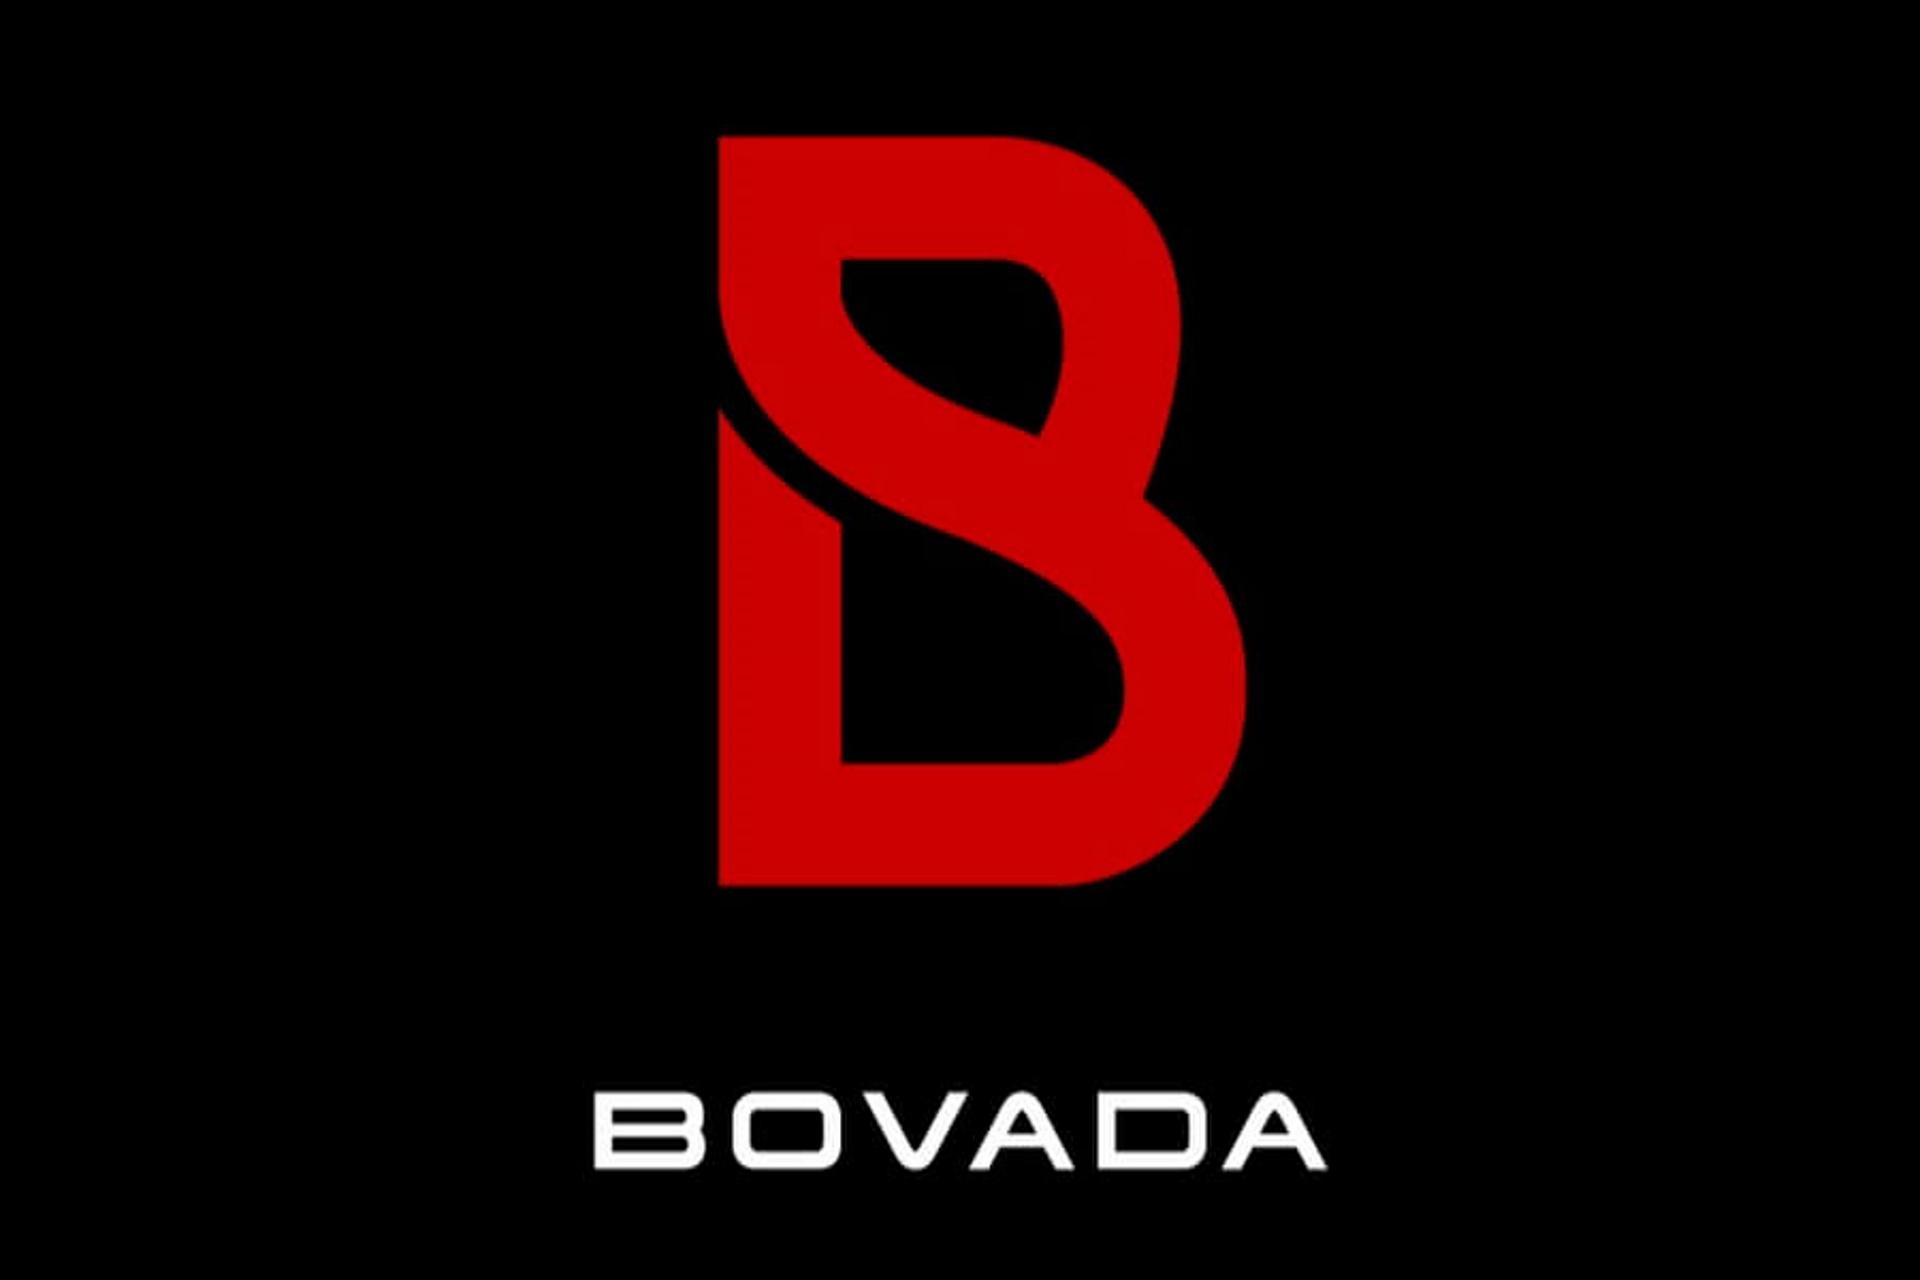 can i trust bovada casino online